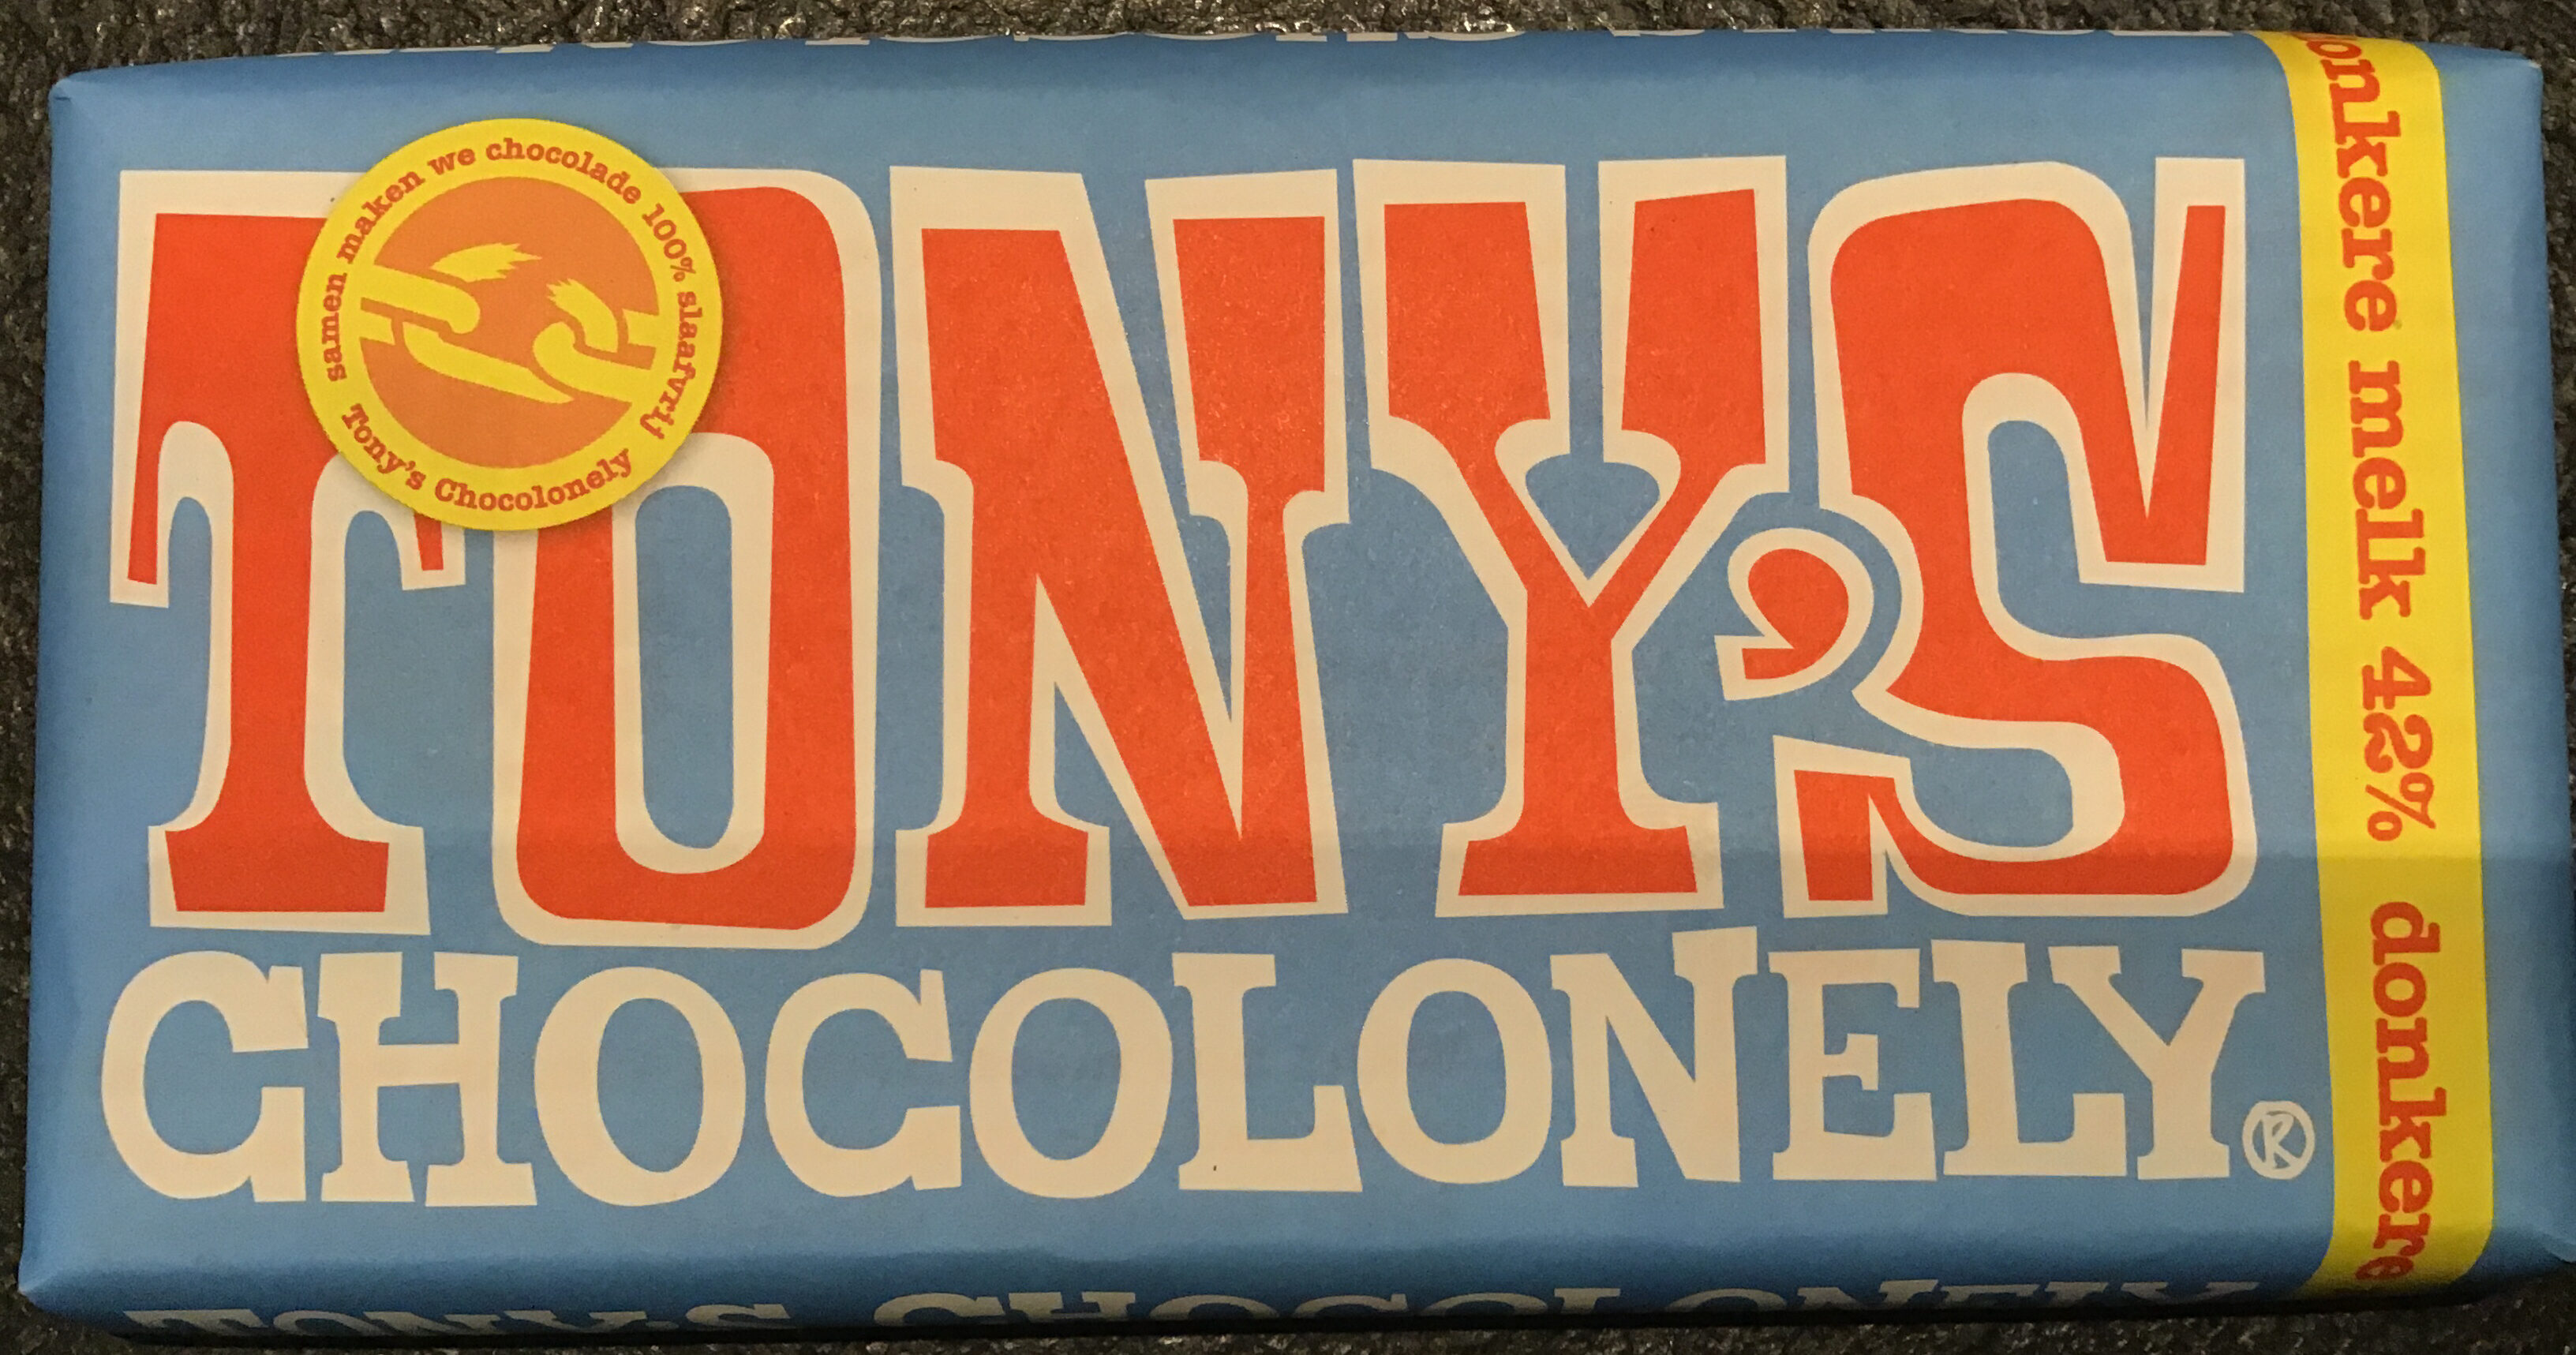 Tonny's Chocolonely donkere melk 42% - Product